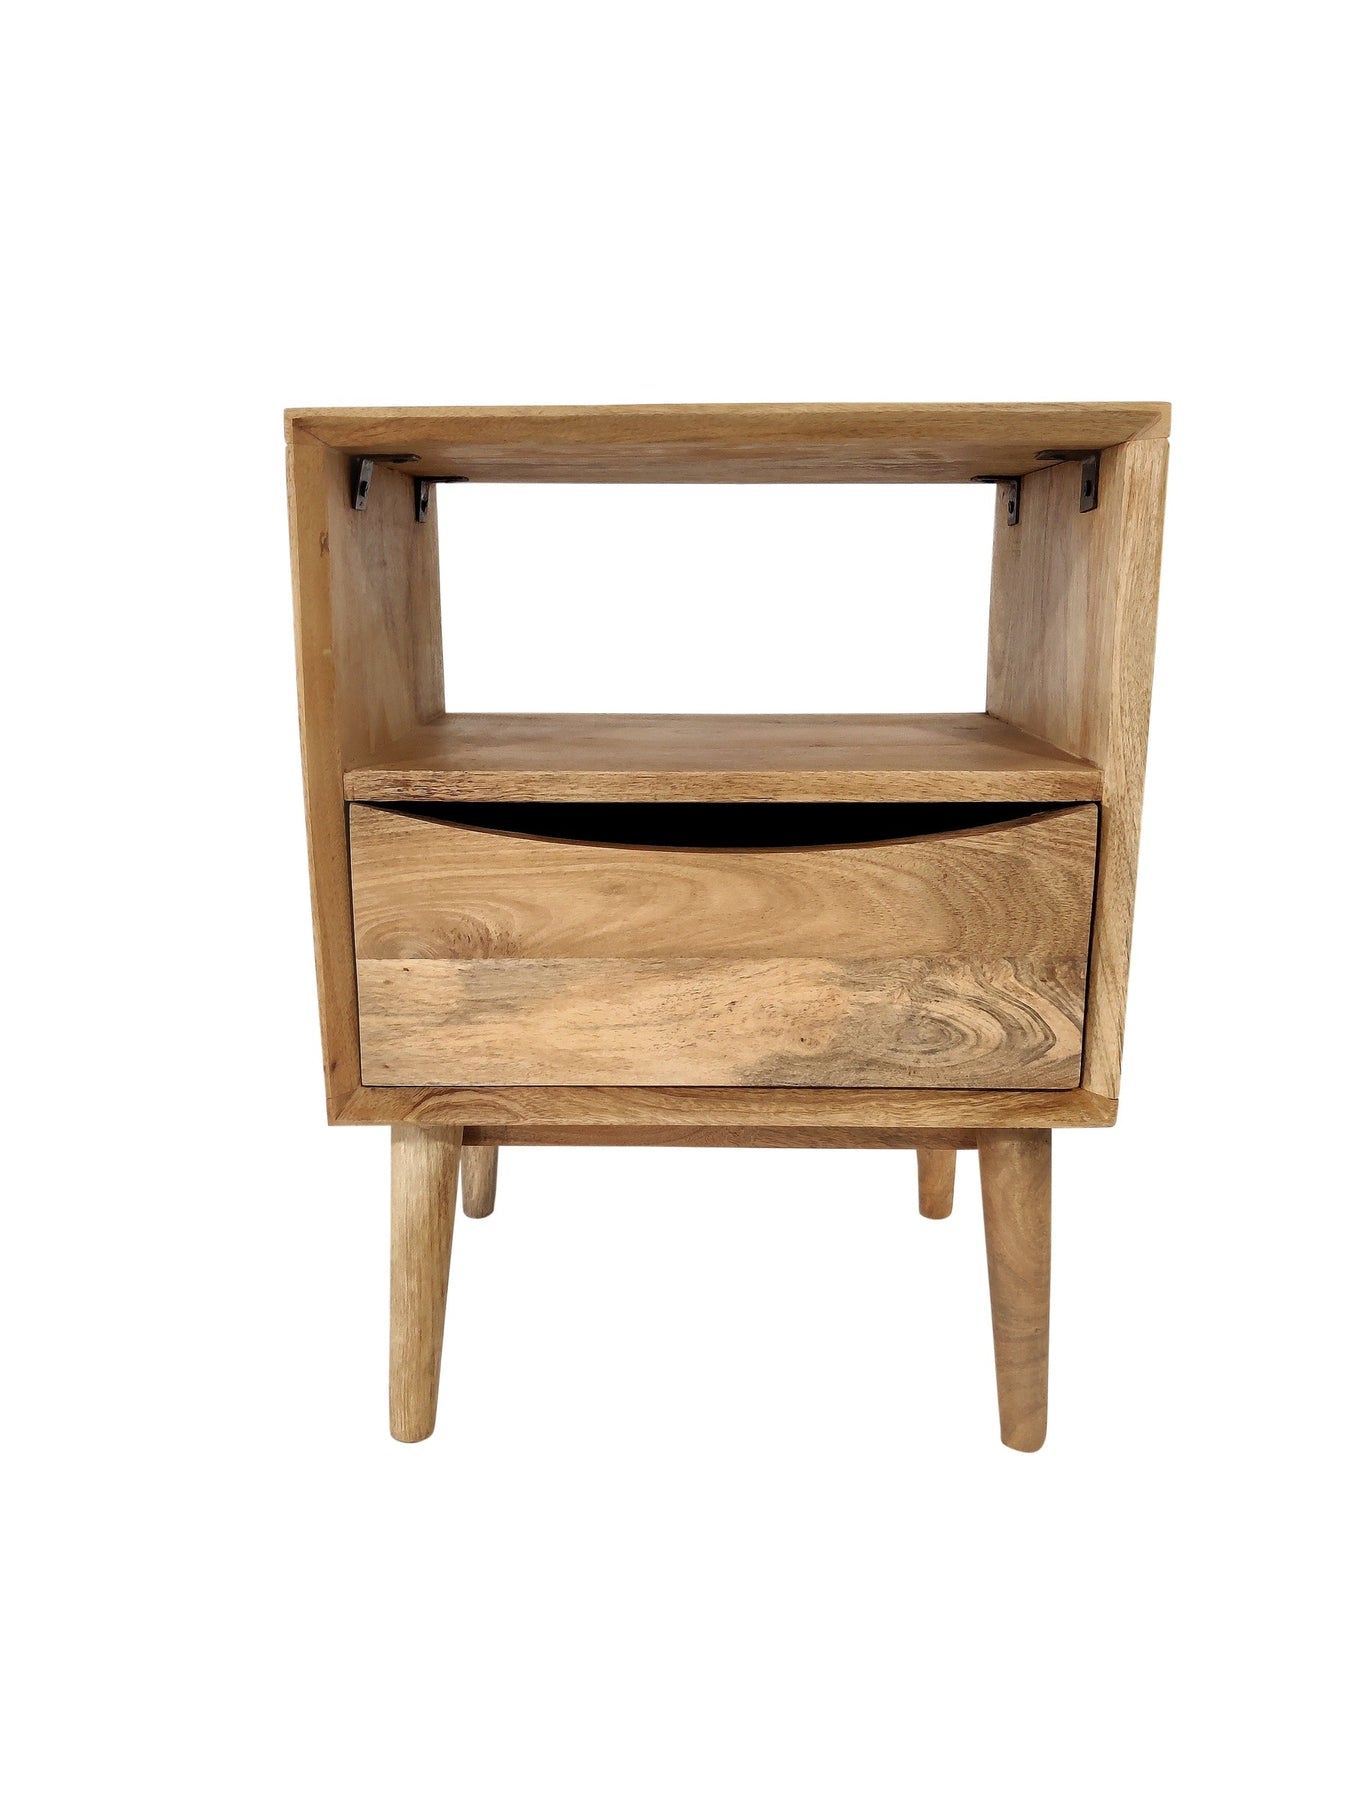 Wooden Retro Sixties Bed Side Table | 42x32x56 cm